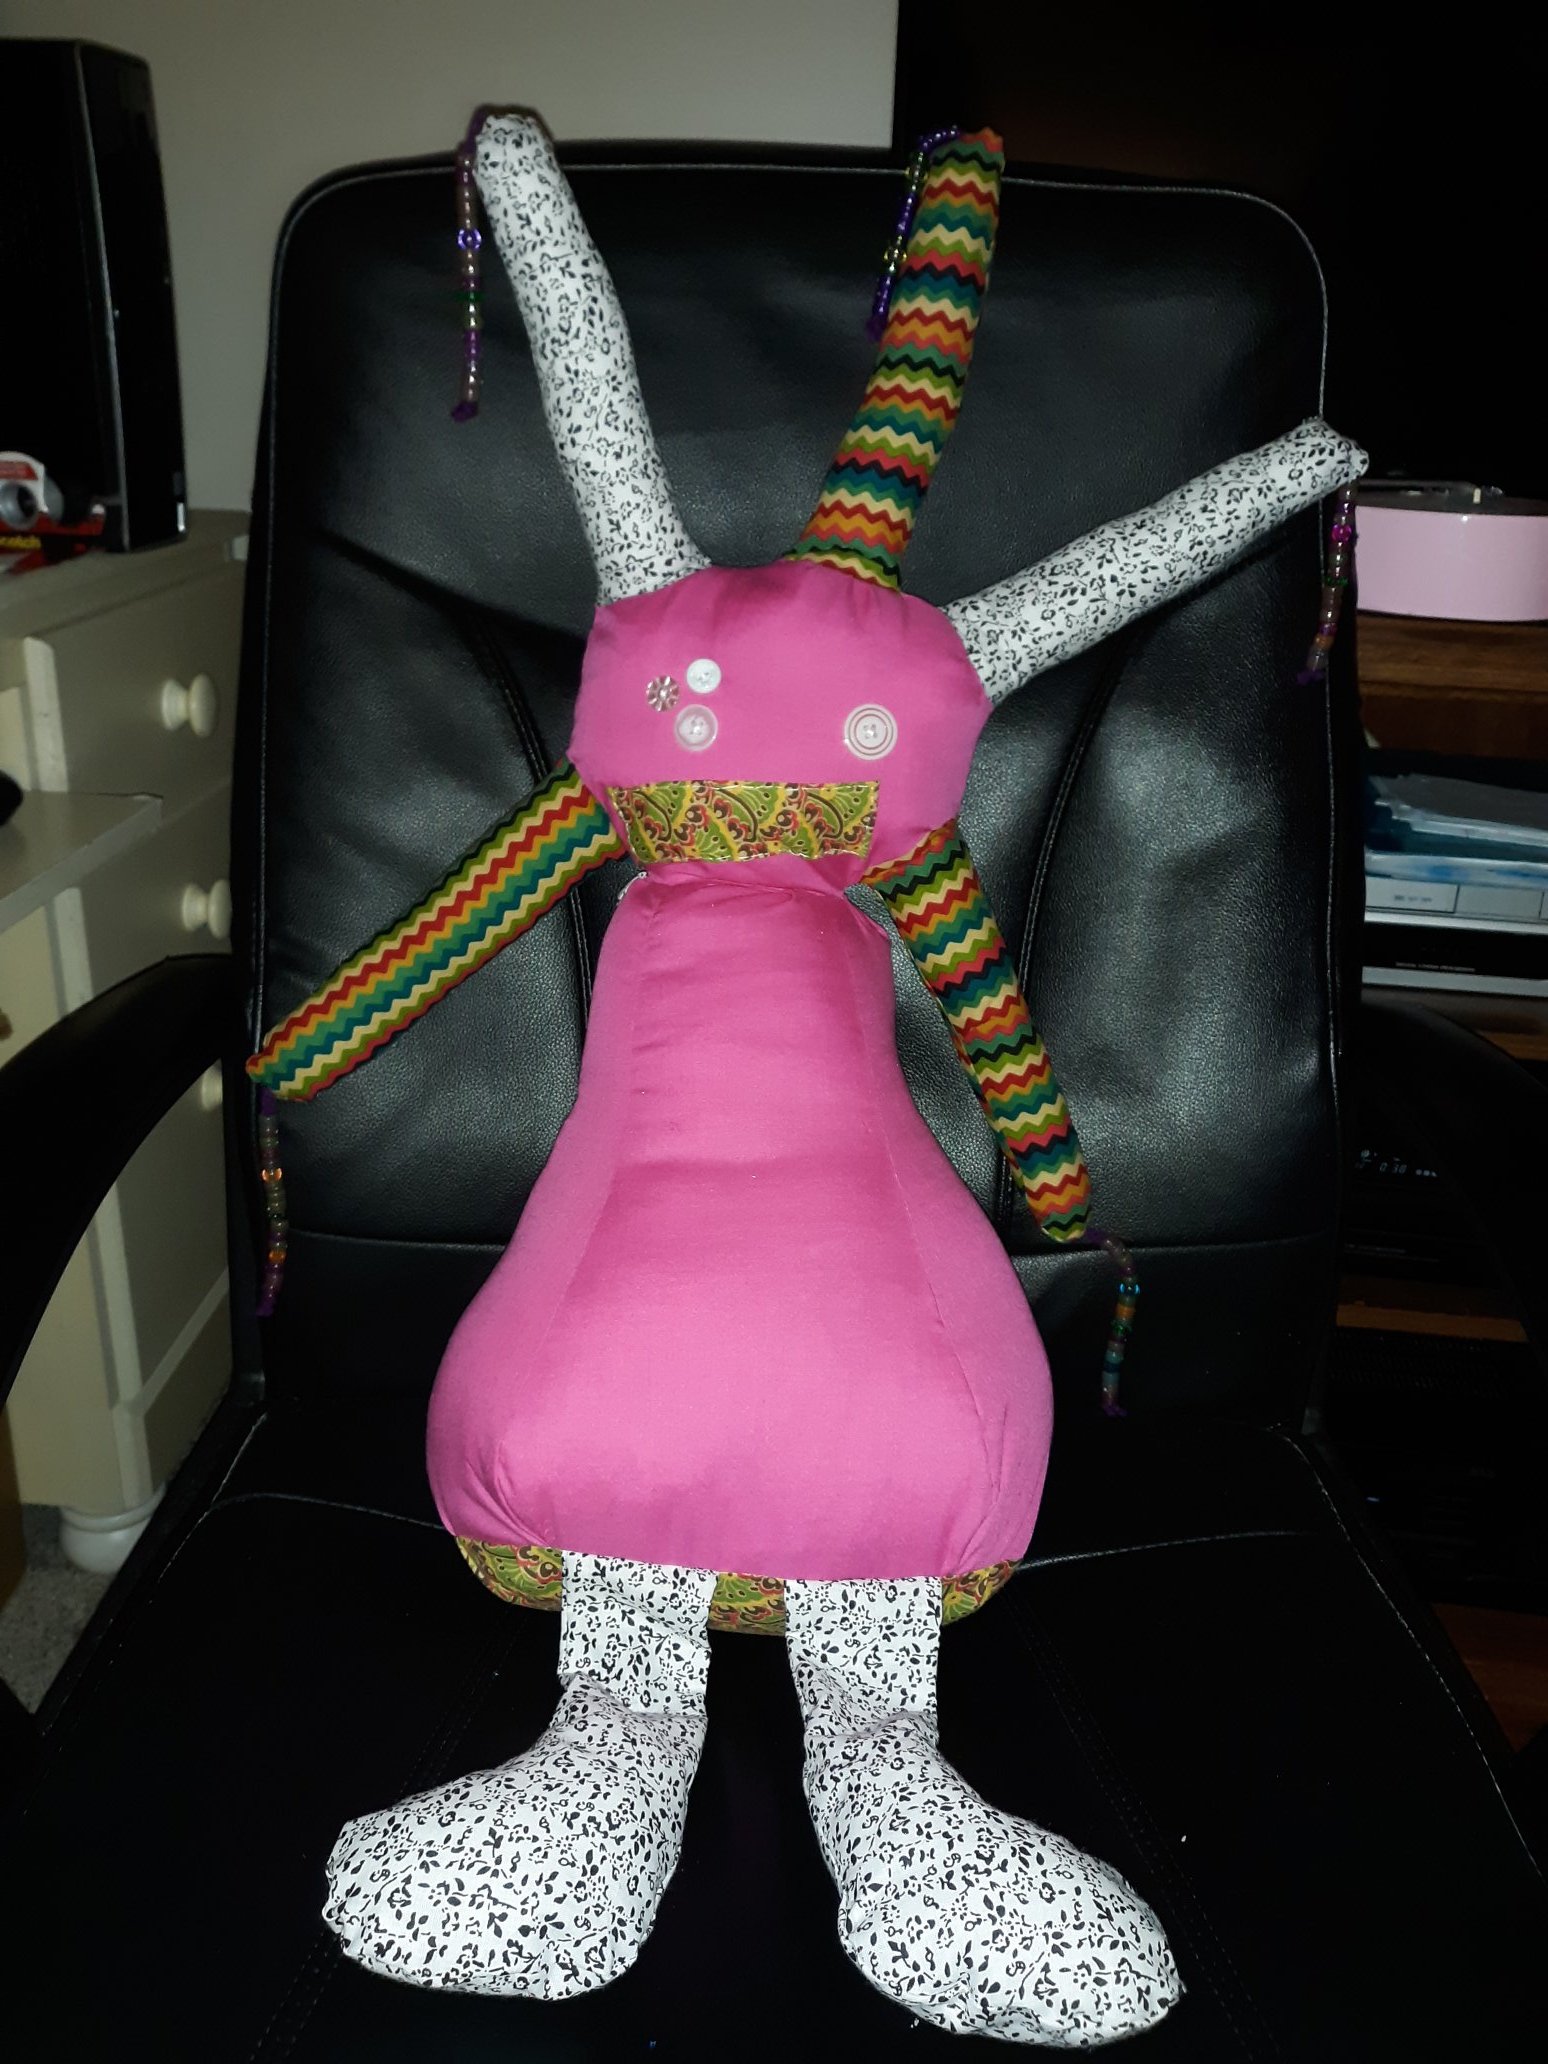 A very large pink doll. It has a circular head with five growths coming out of it. Each growth has a string of beads hanging off the ends of them. Three of the growths have a colorful chevron pattern and two of them have a black and white floral pattern. The face of the doll has three white button eyes on the left side and one white button eye on the right side. The mouth is a rectangle piece of fabric sewn on. The body is much larger than the head. It gets larger as it goes to the bottom. The bottom of the doll is of an intricate pattern and there are two legs sticking out that are of the same black and white floral pattern.